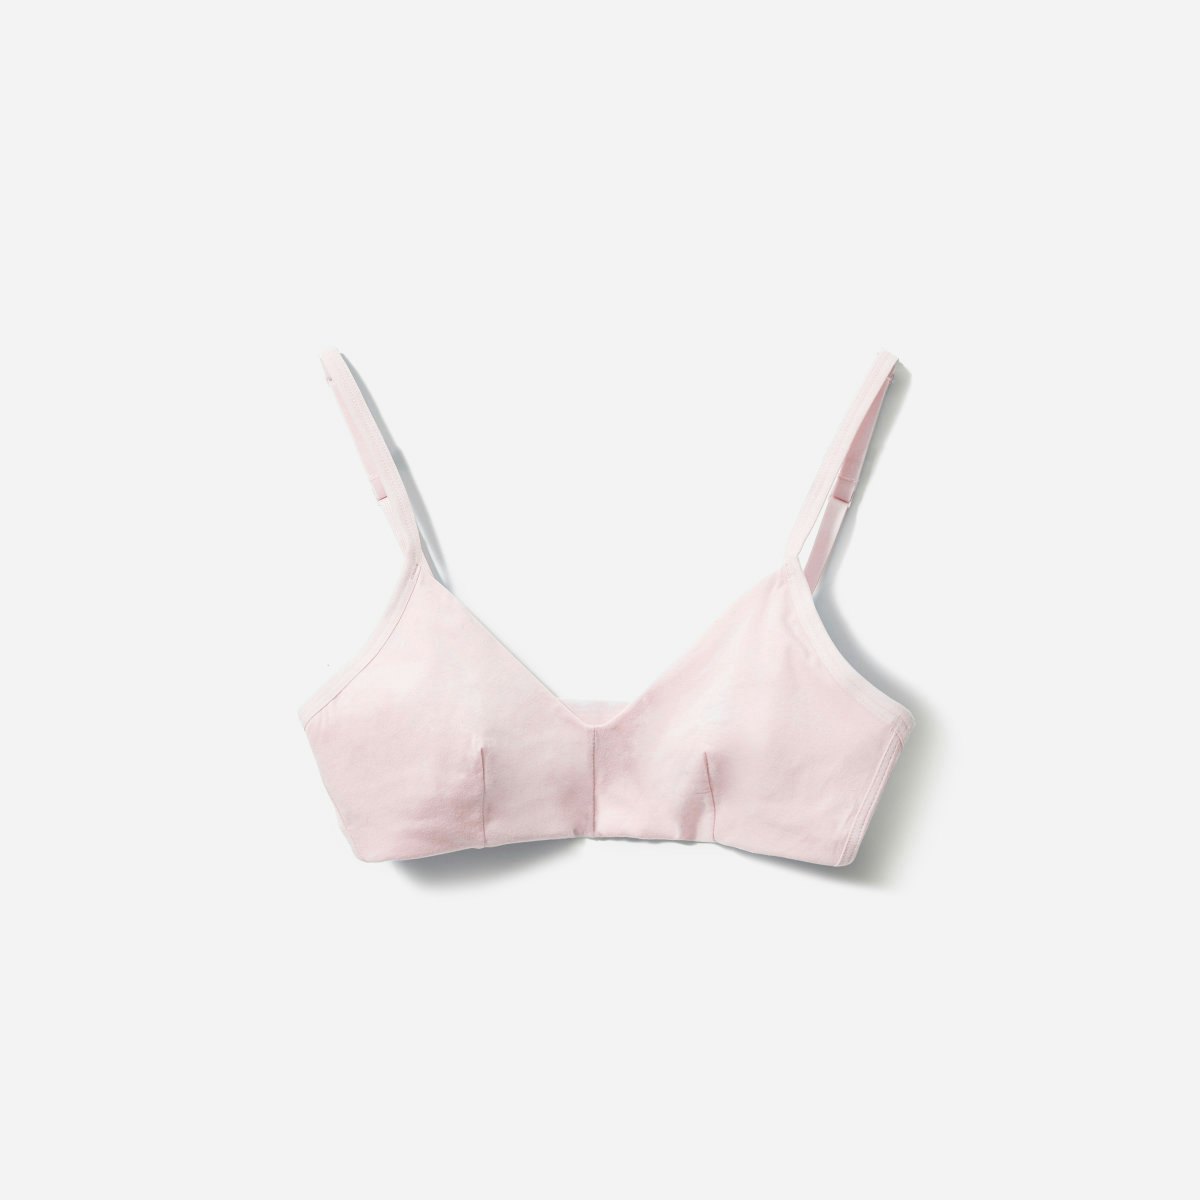 Everlane Adds a $24 No-Underwire Bralette to Their Collection